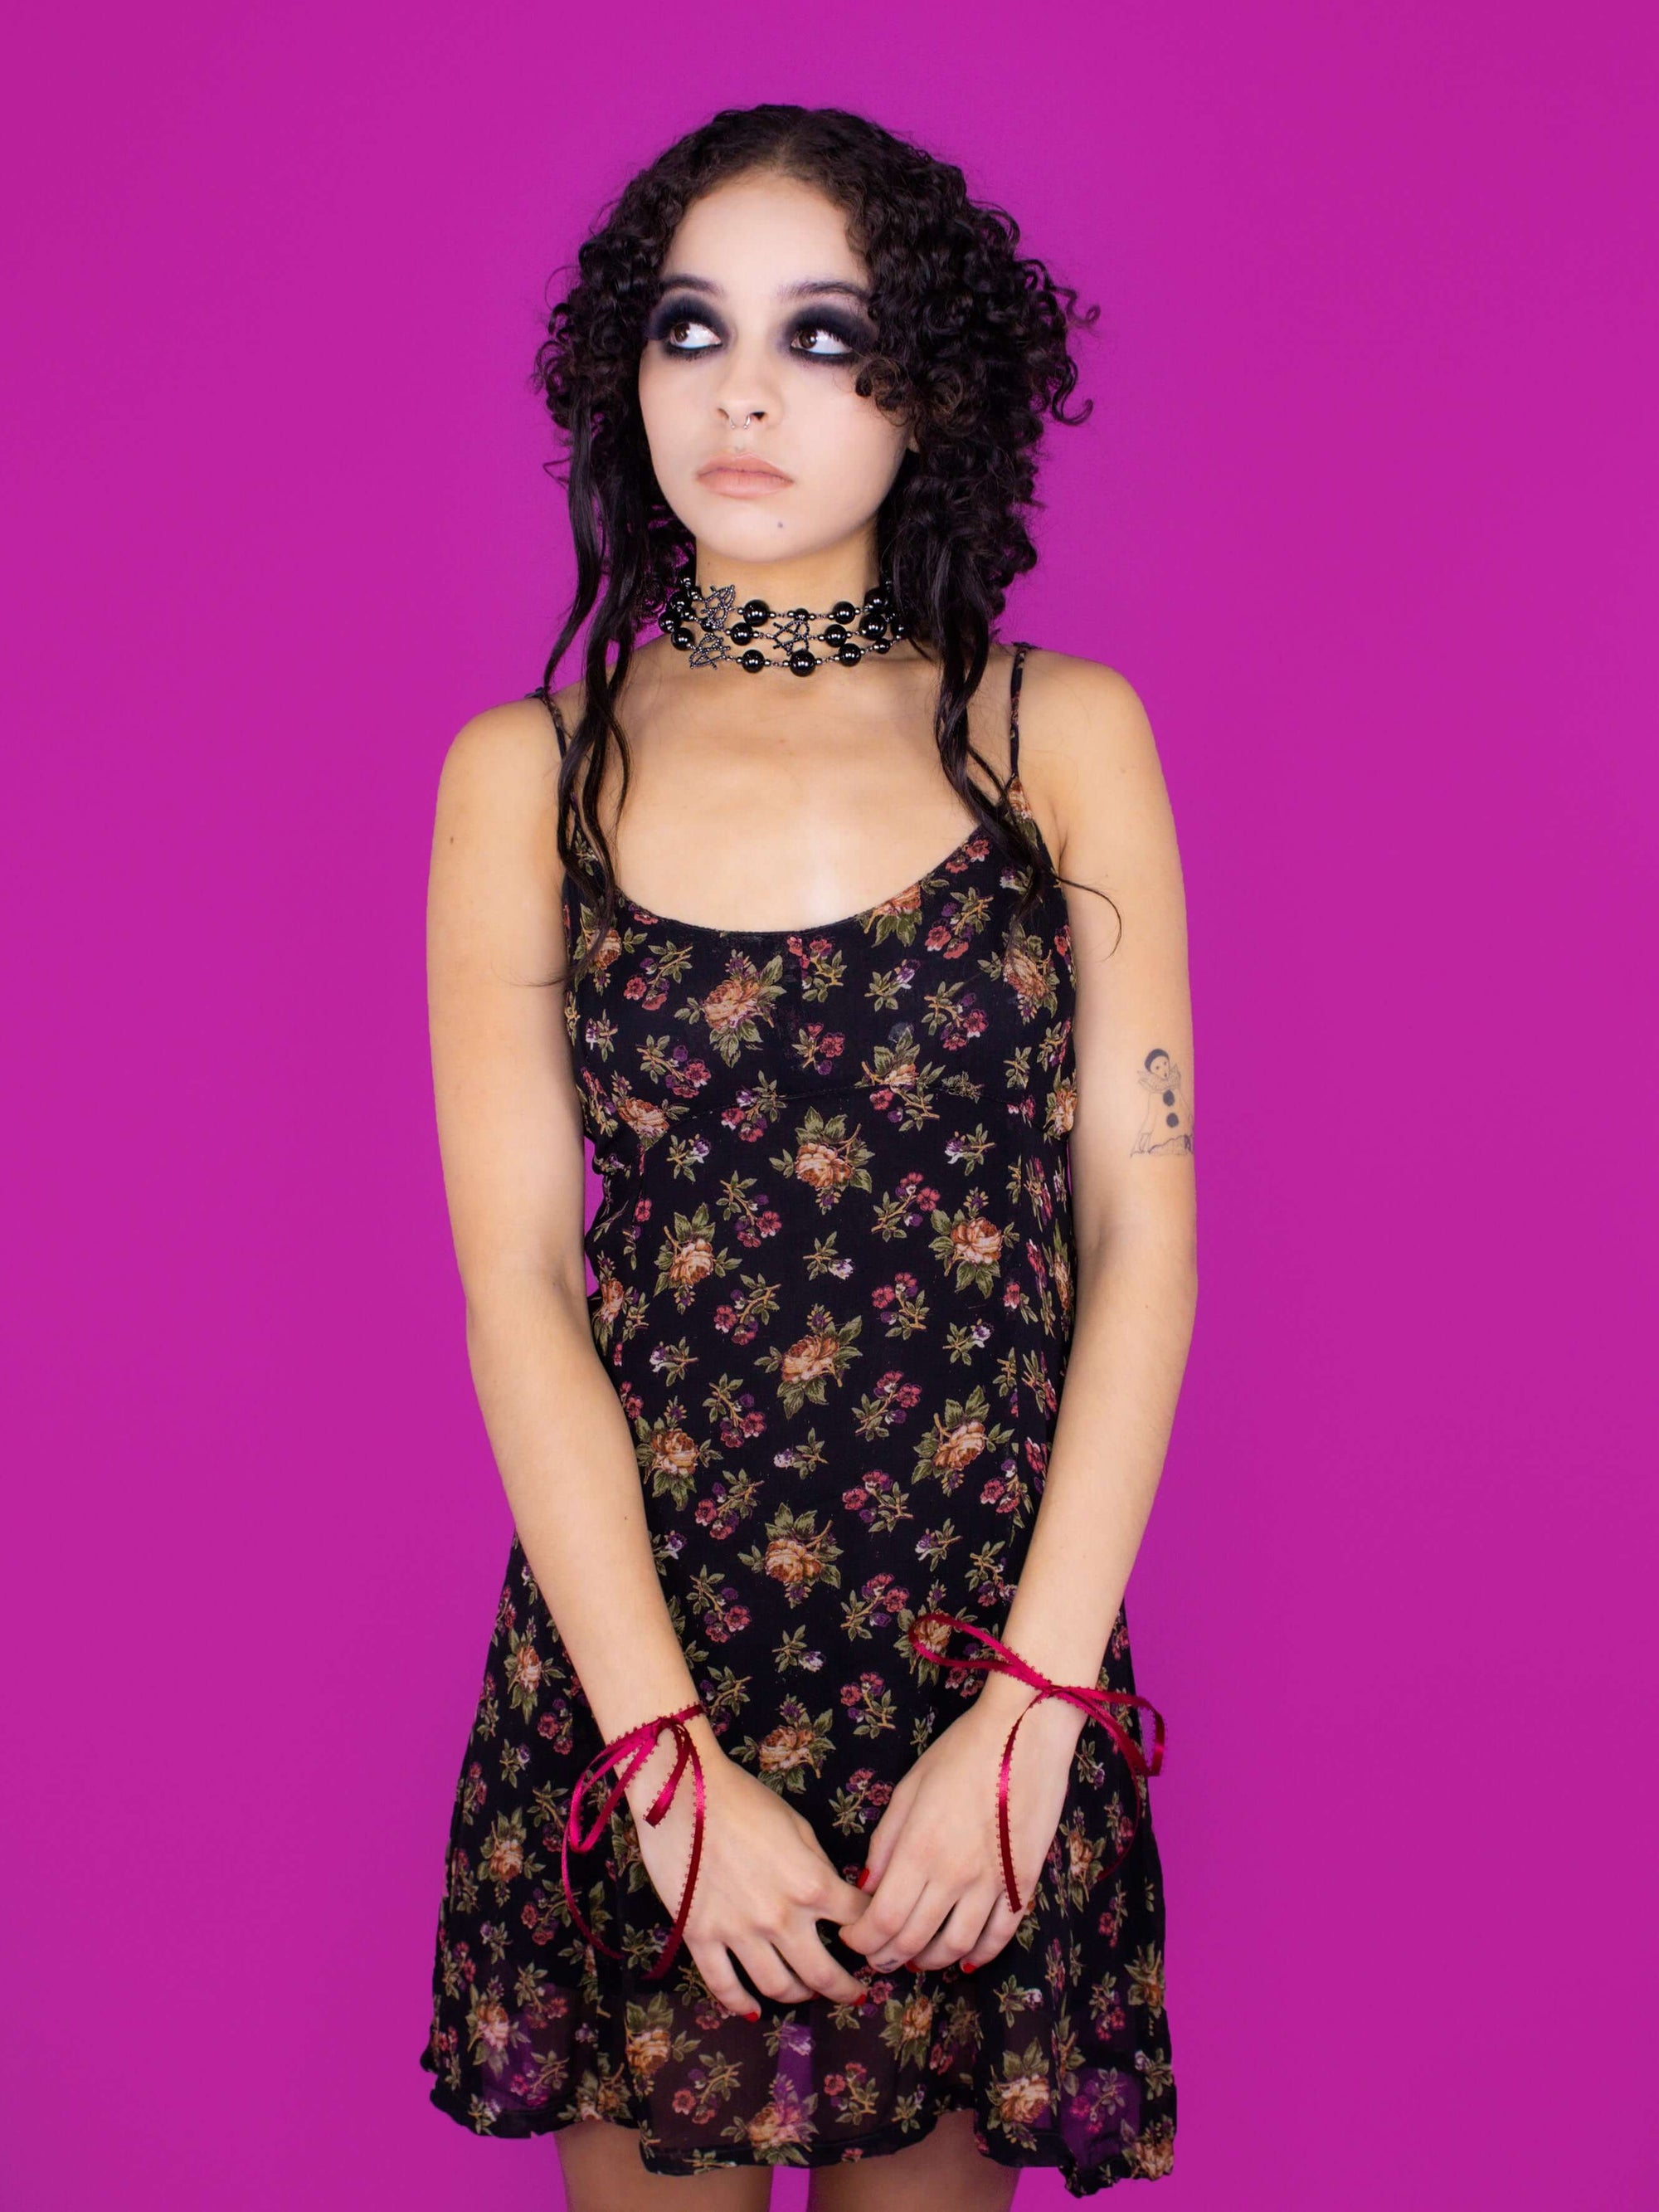 Further shot of model with necklace wrapped three times, styled in black floral dress with ribbons tied at wrists